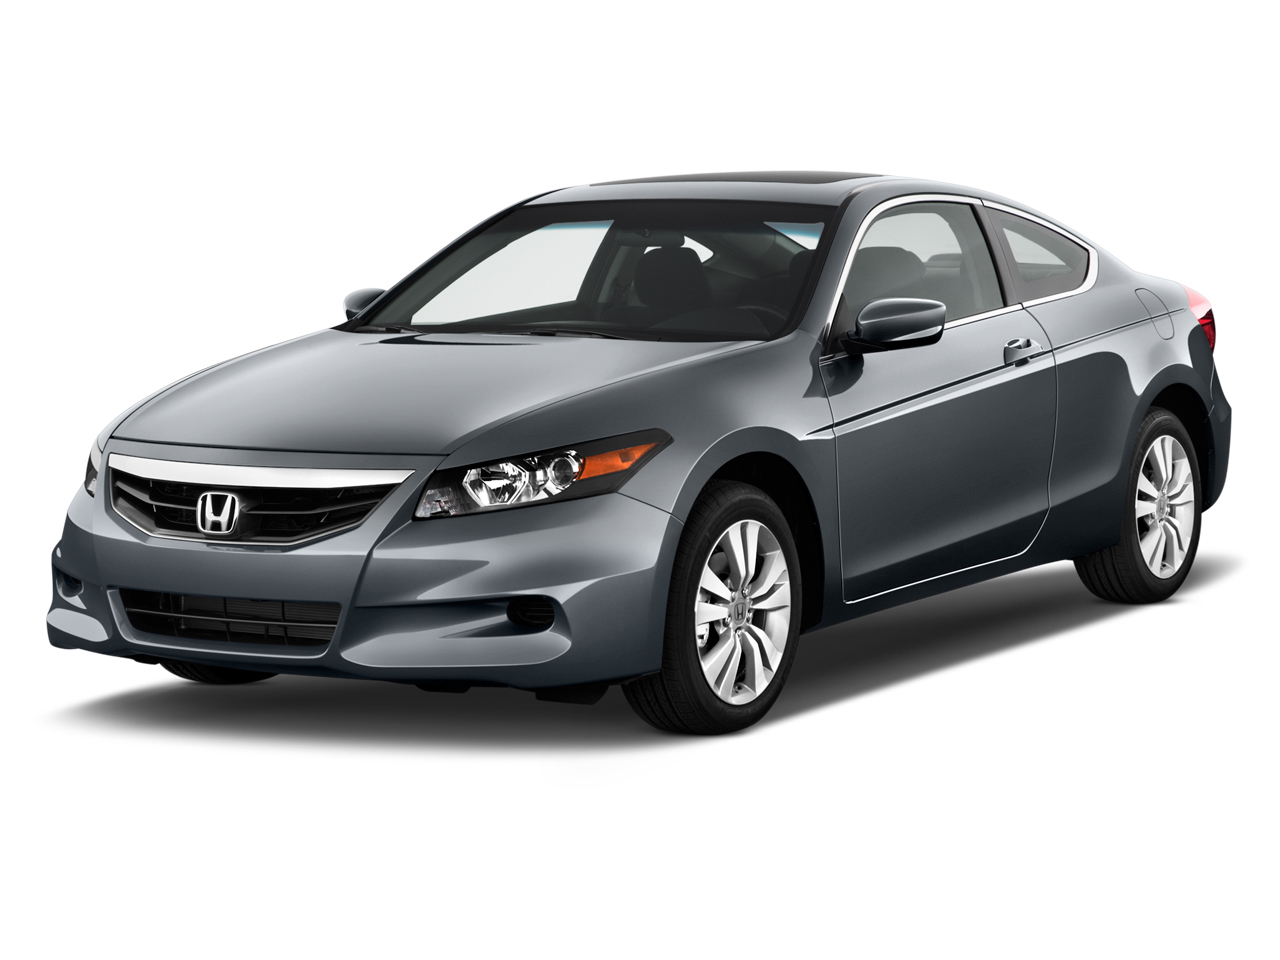 2012 Honda Accord Review, Ratings, Specs, Prices, and Photos - The Car